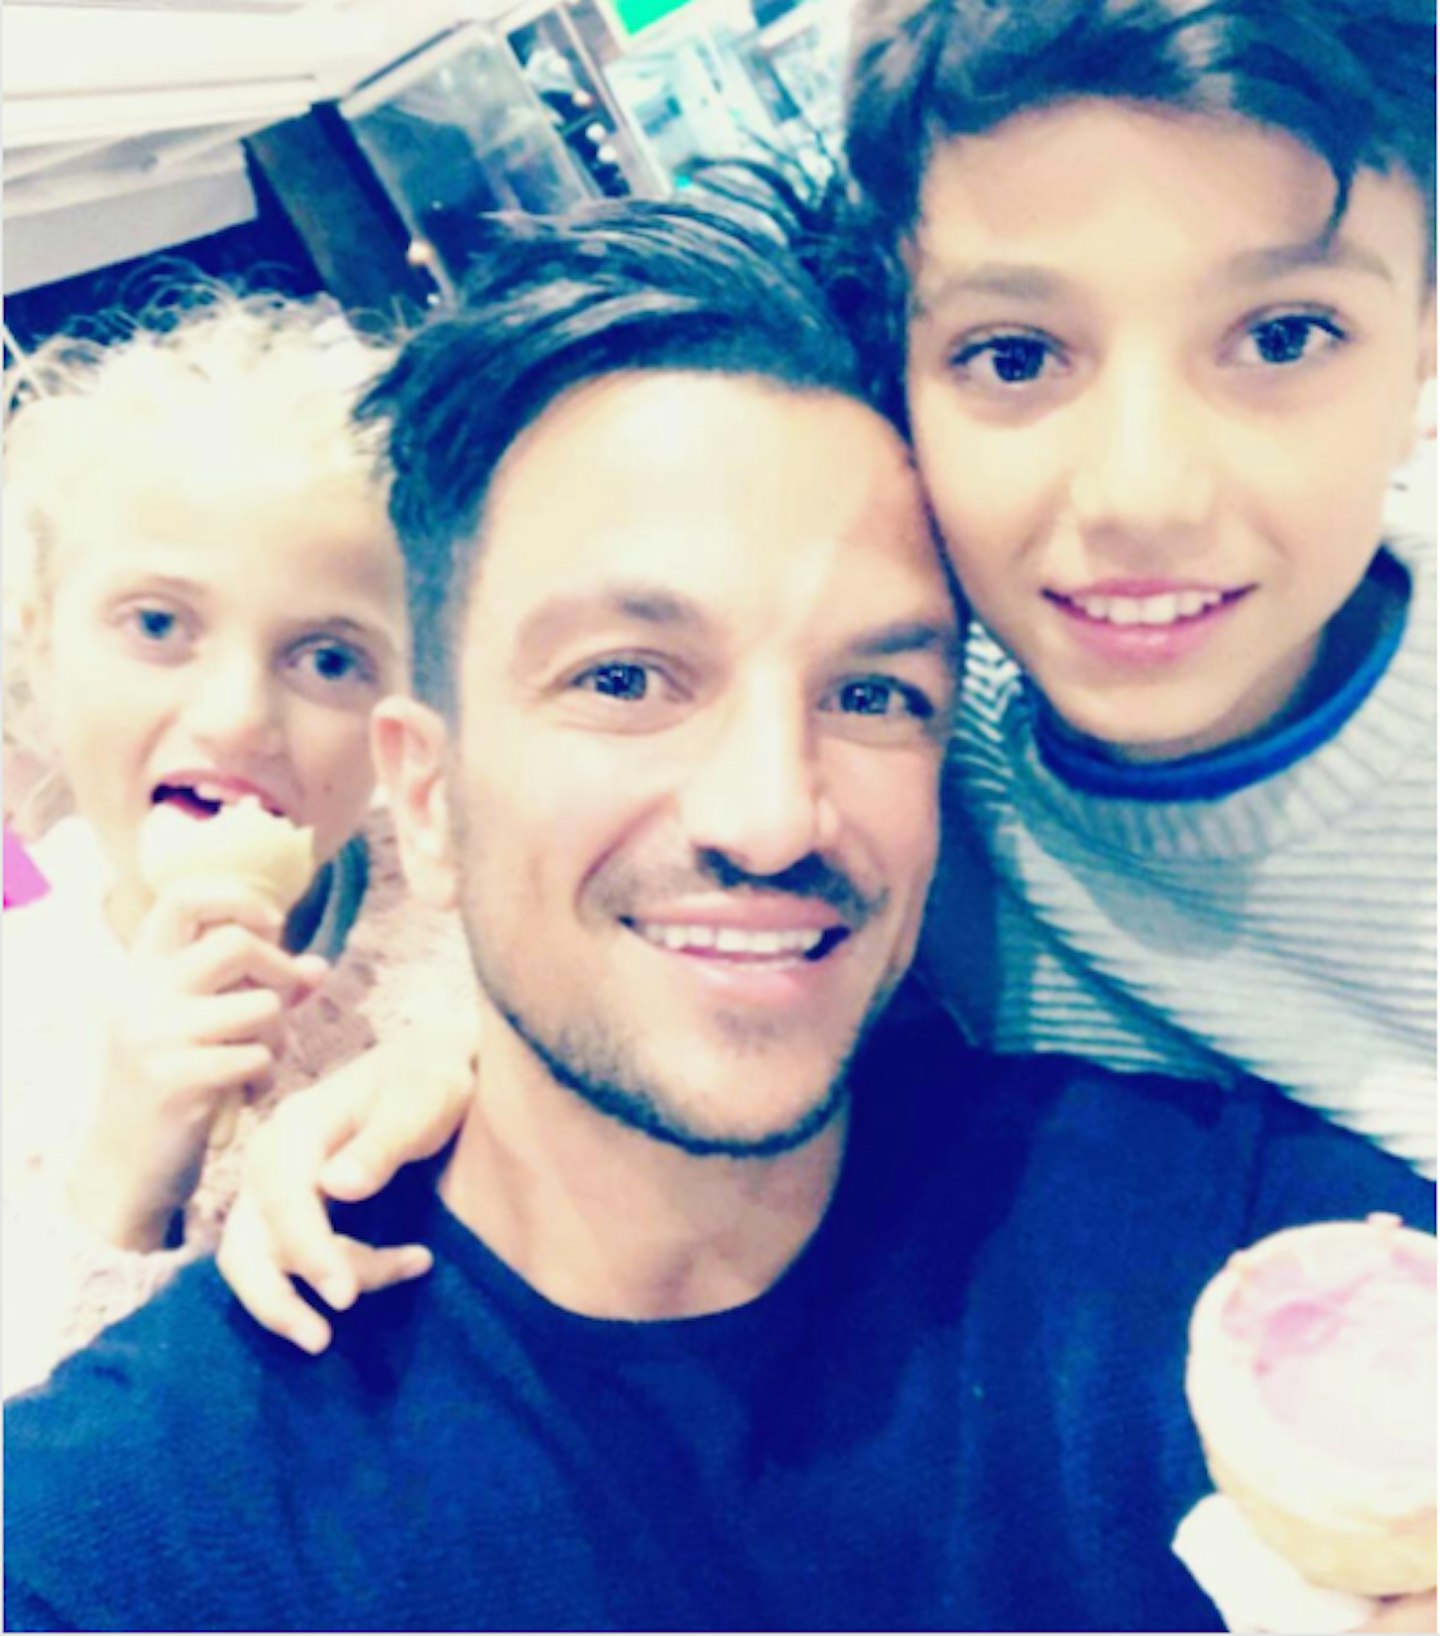 peter andre princess andre junior andre photo together